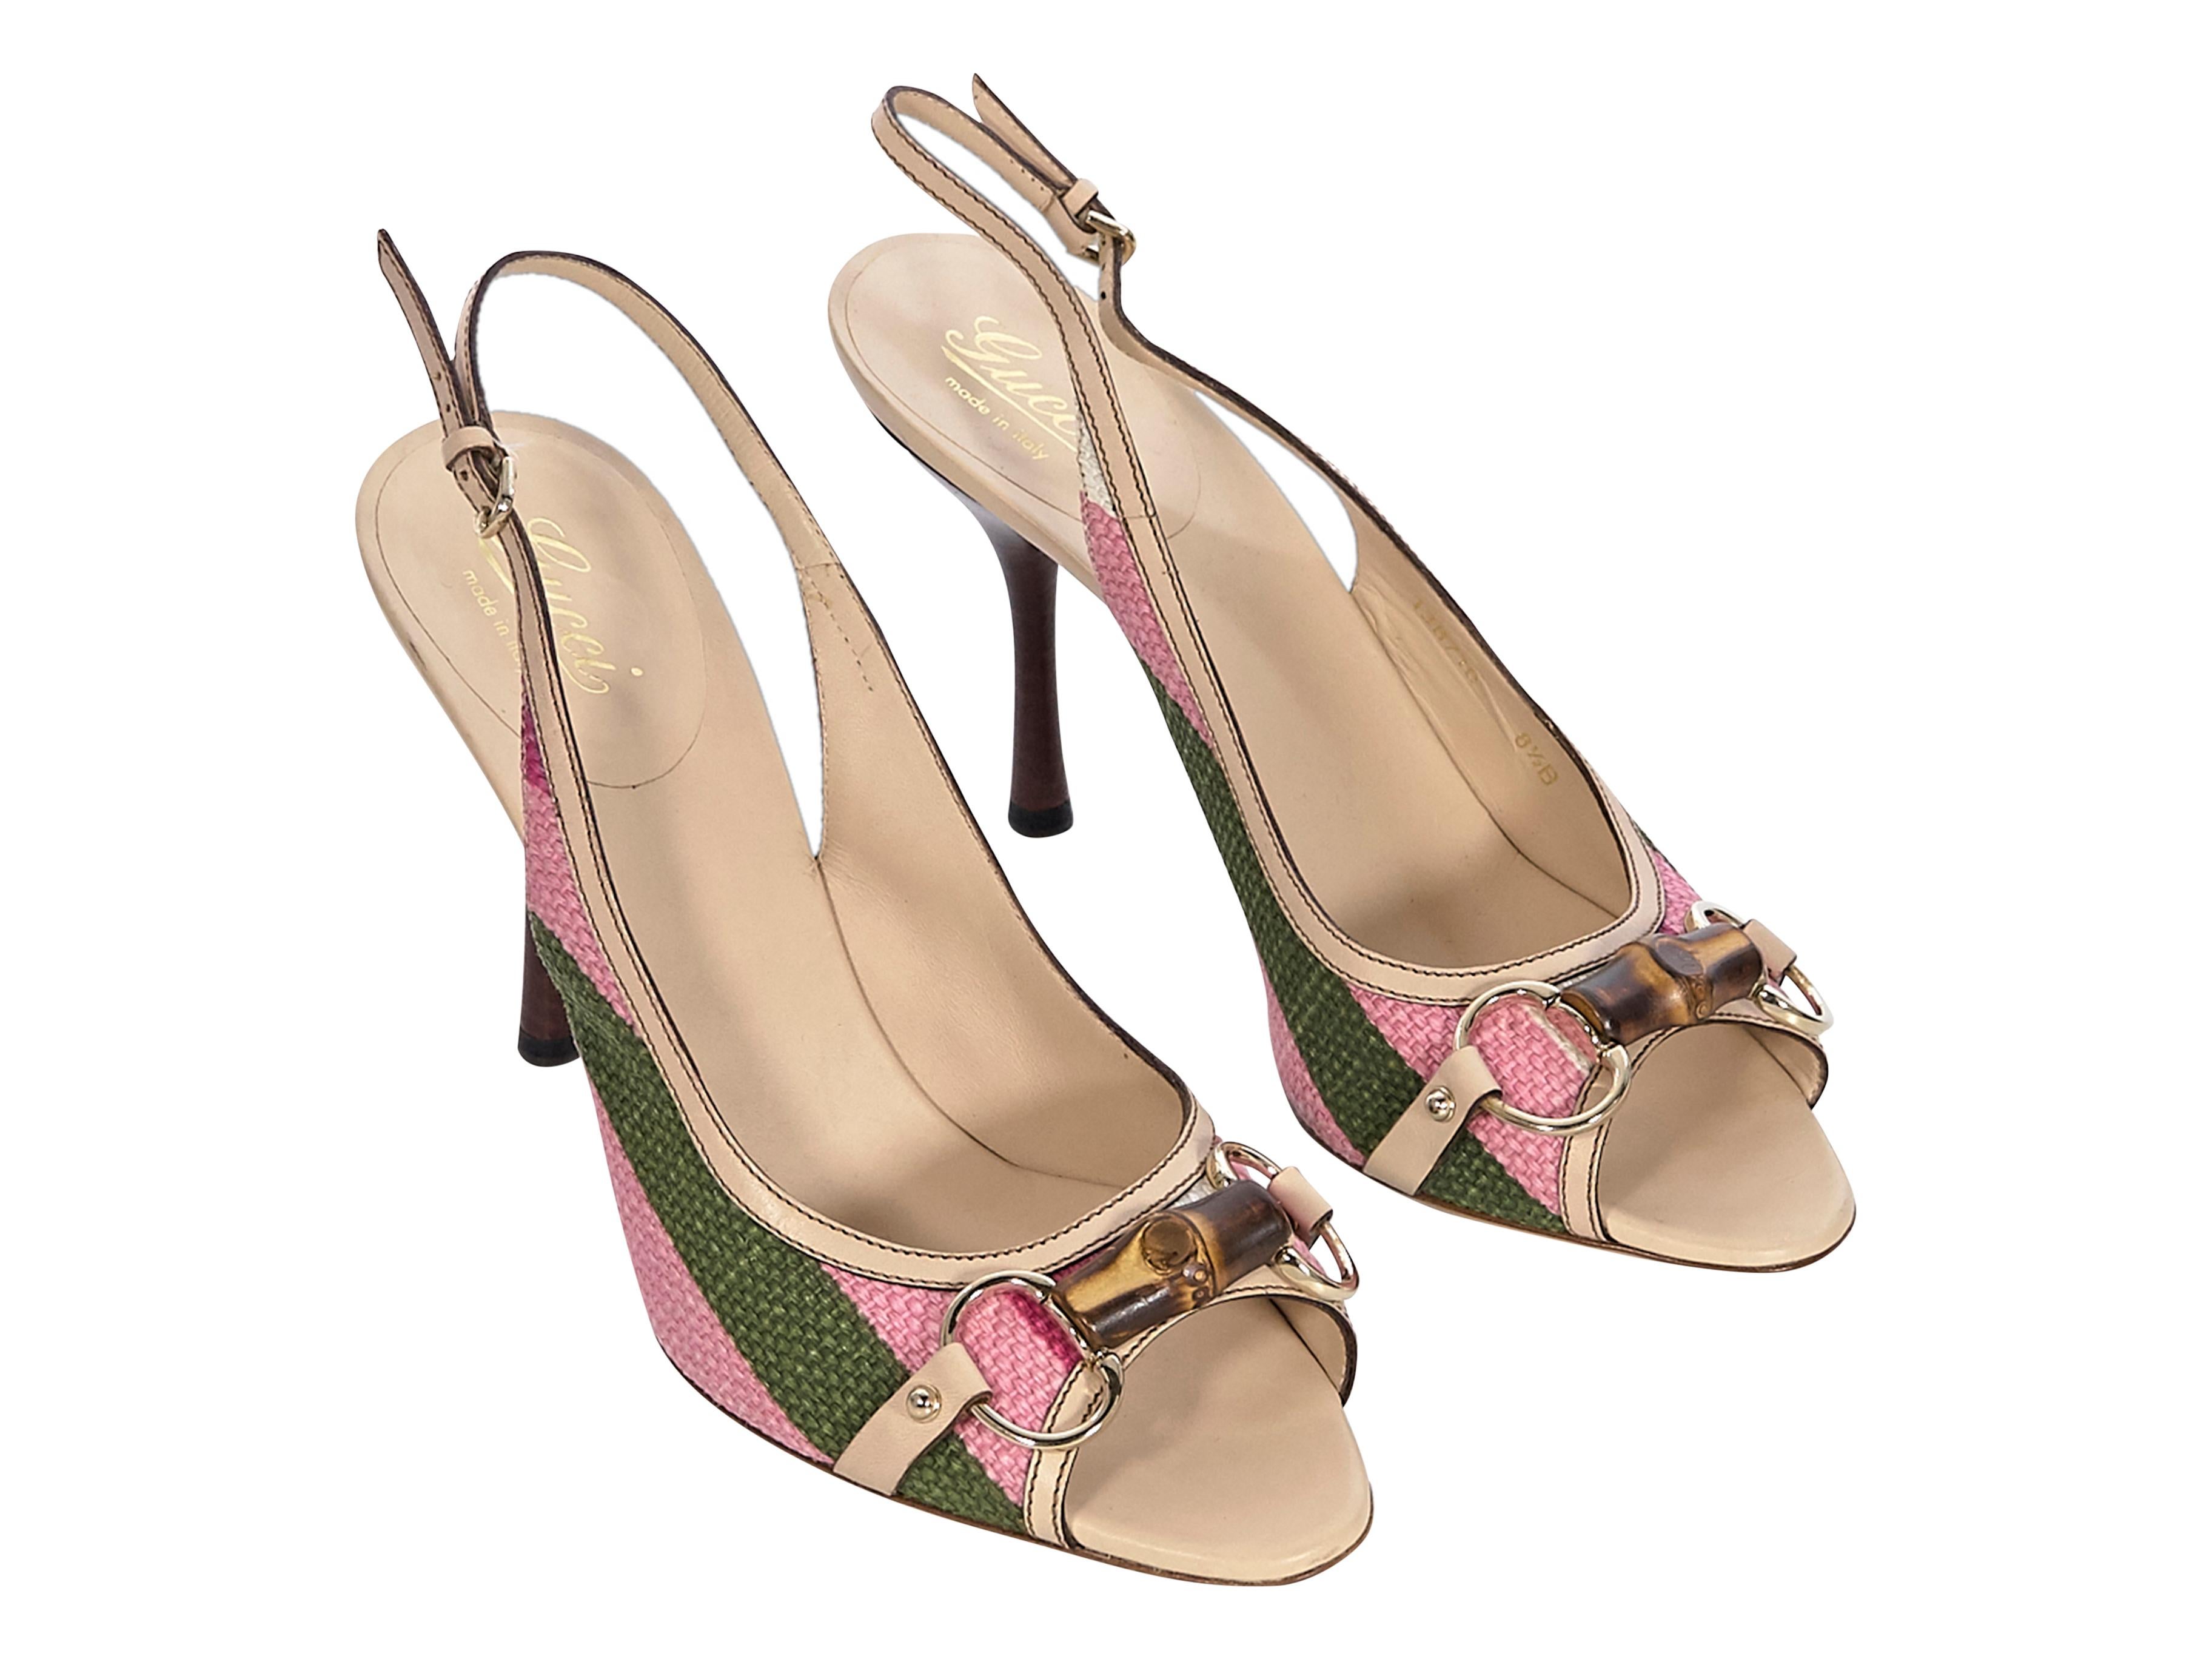 Product details:  Pink and green striped slingback heels by Gucci.  Adjustable slingback strap.  Bamboo horsebit detail accents vamp.  Peep toe.  Goldtone hardware.  3.5